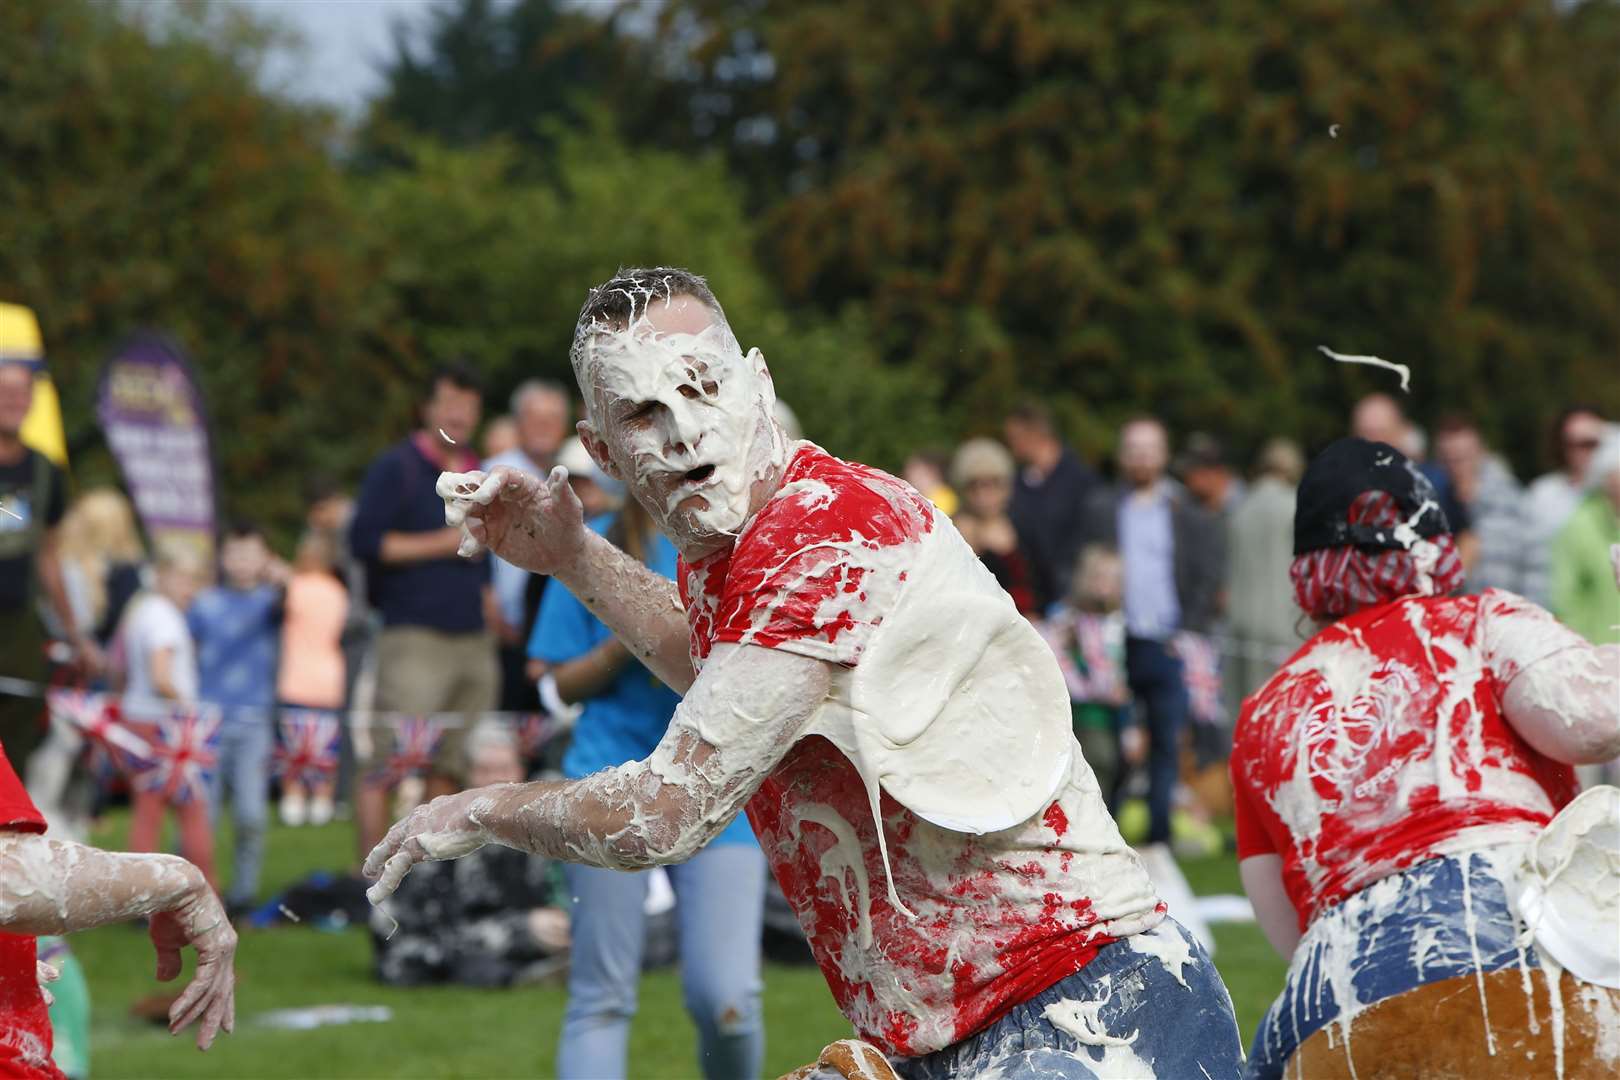 A pie in the face earns the most points